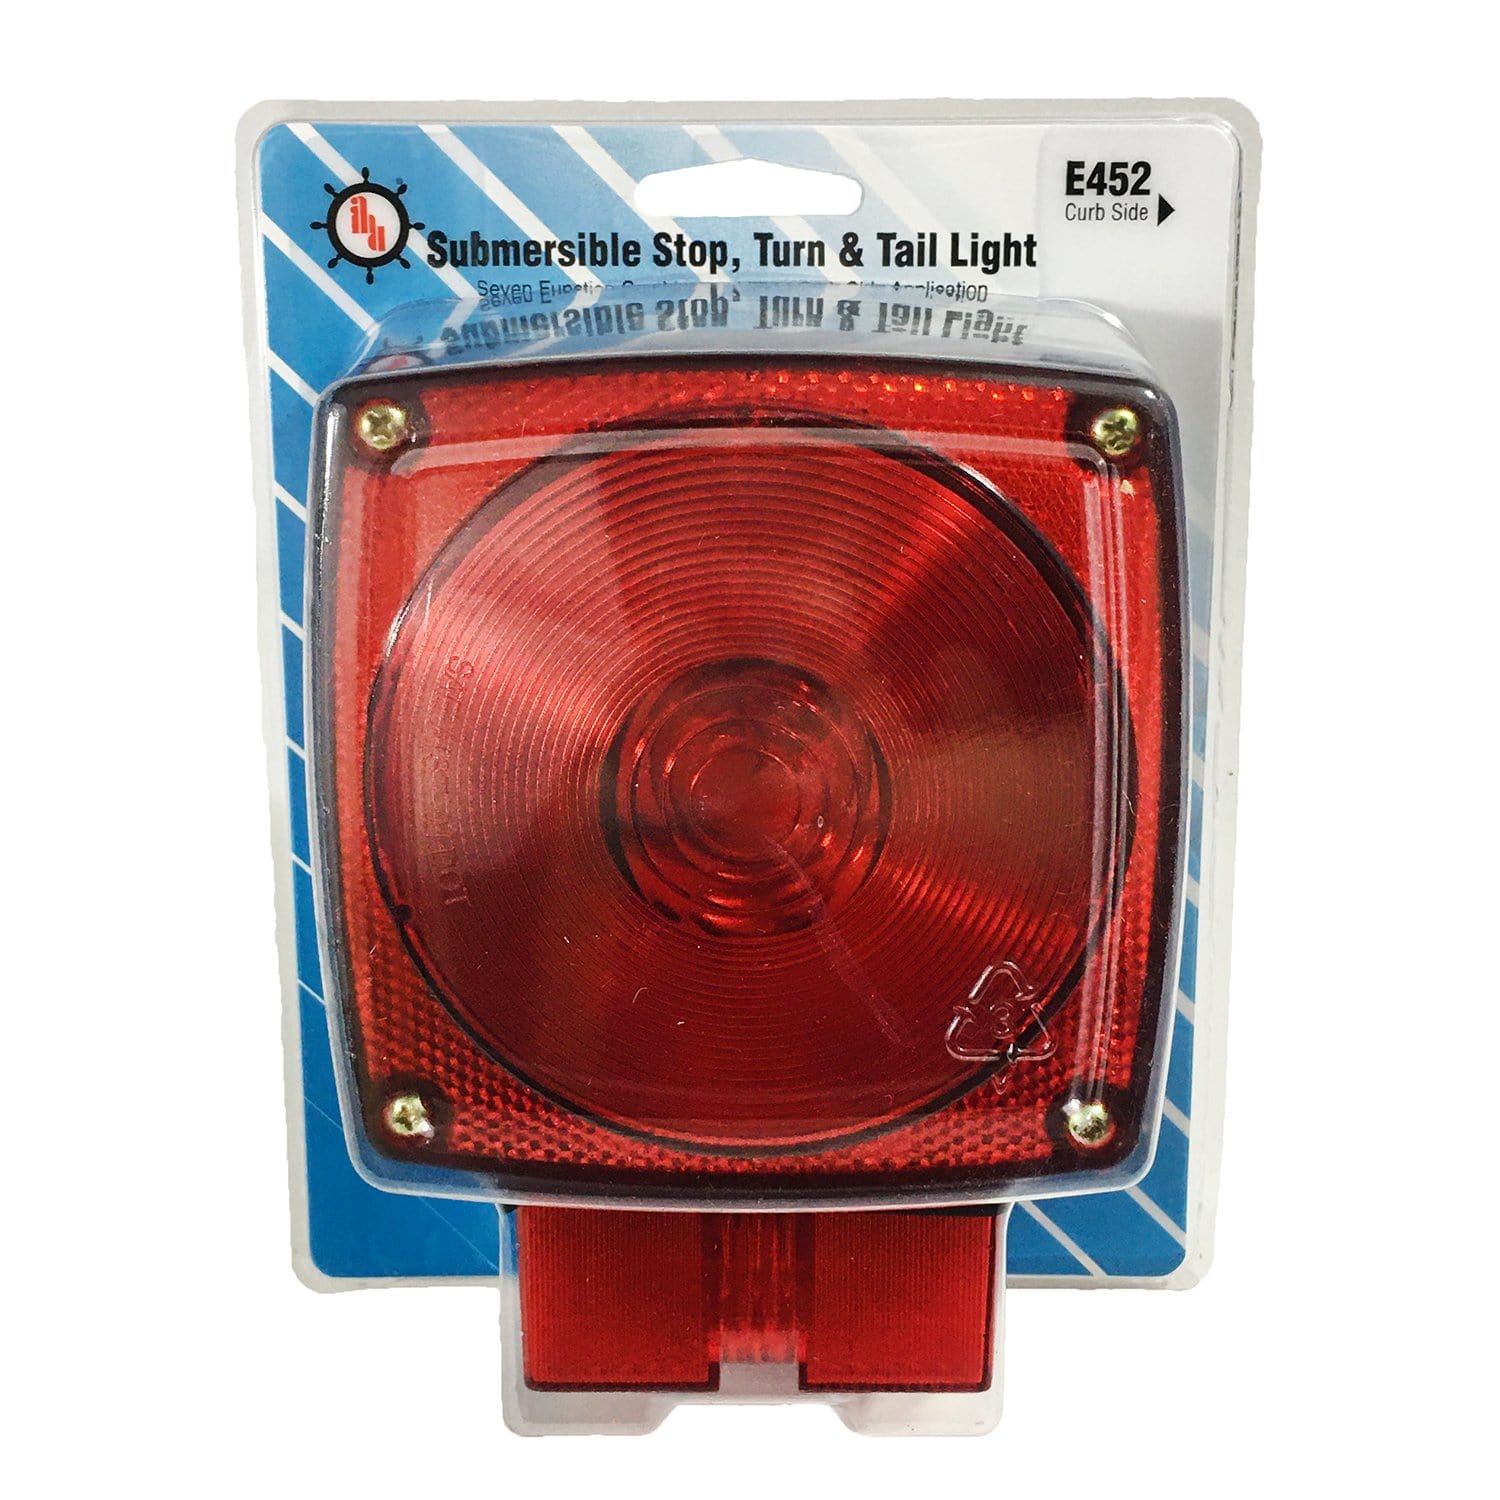 Peterson Manufacturing / Anderson Marine E452 Red Surface Submersible Combination Trailer Tail Light